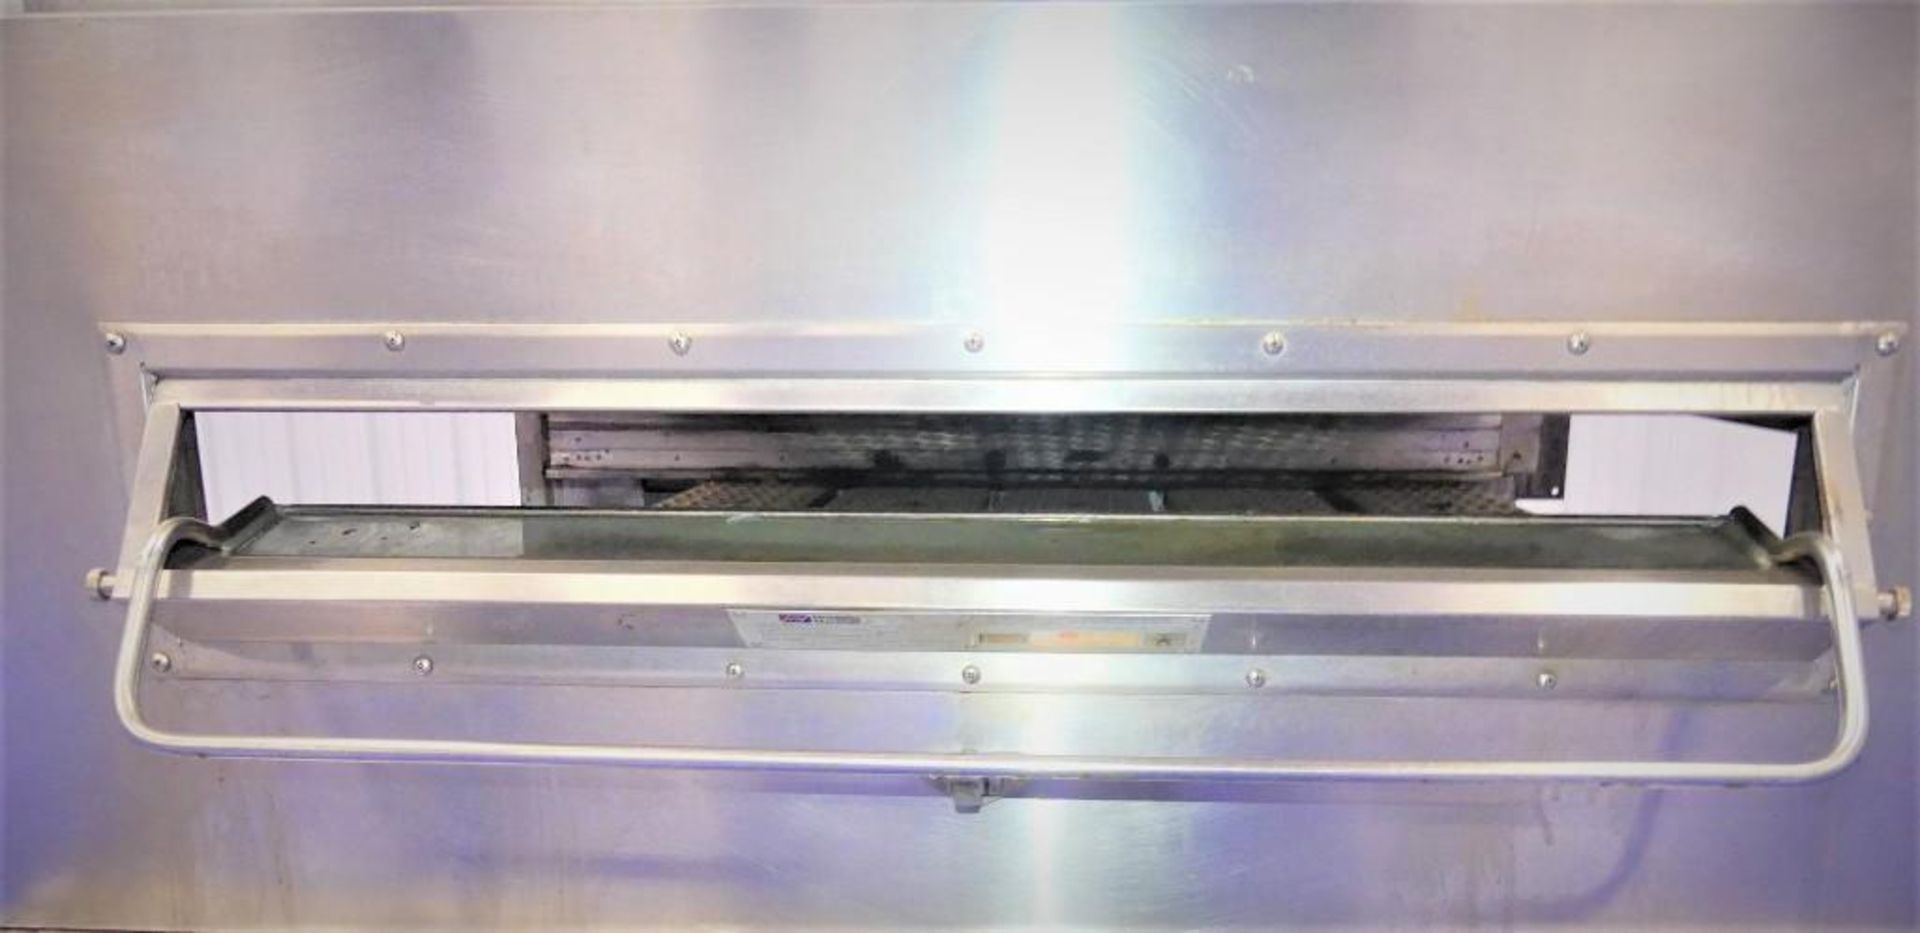 Middleby Marshal PS360WB Oven - Image 11 of 17